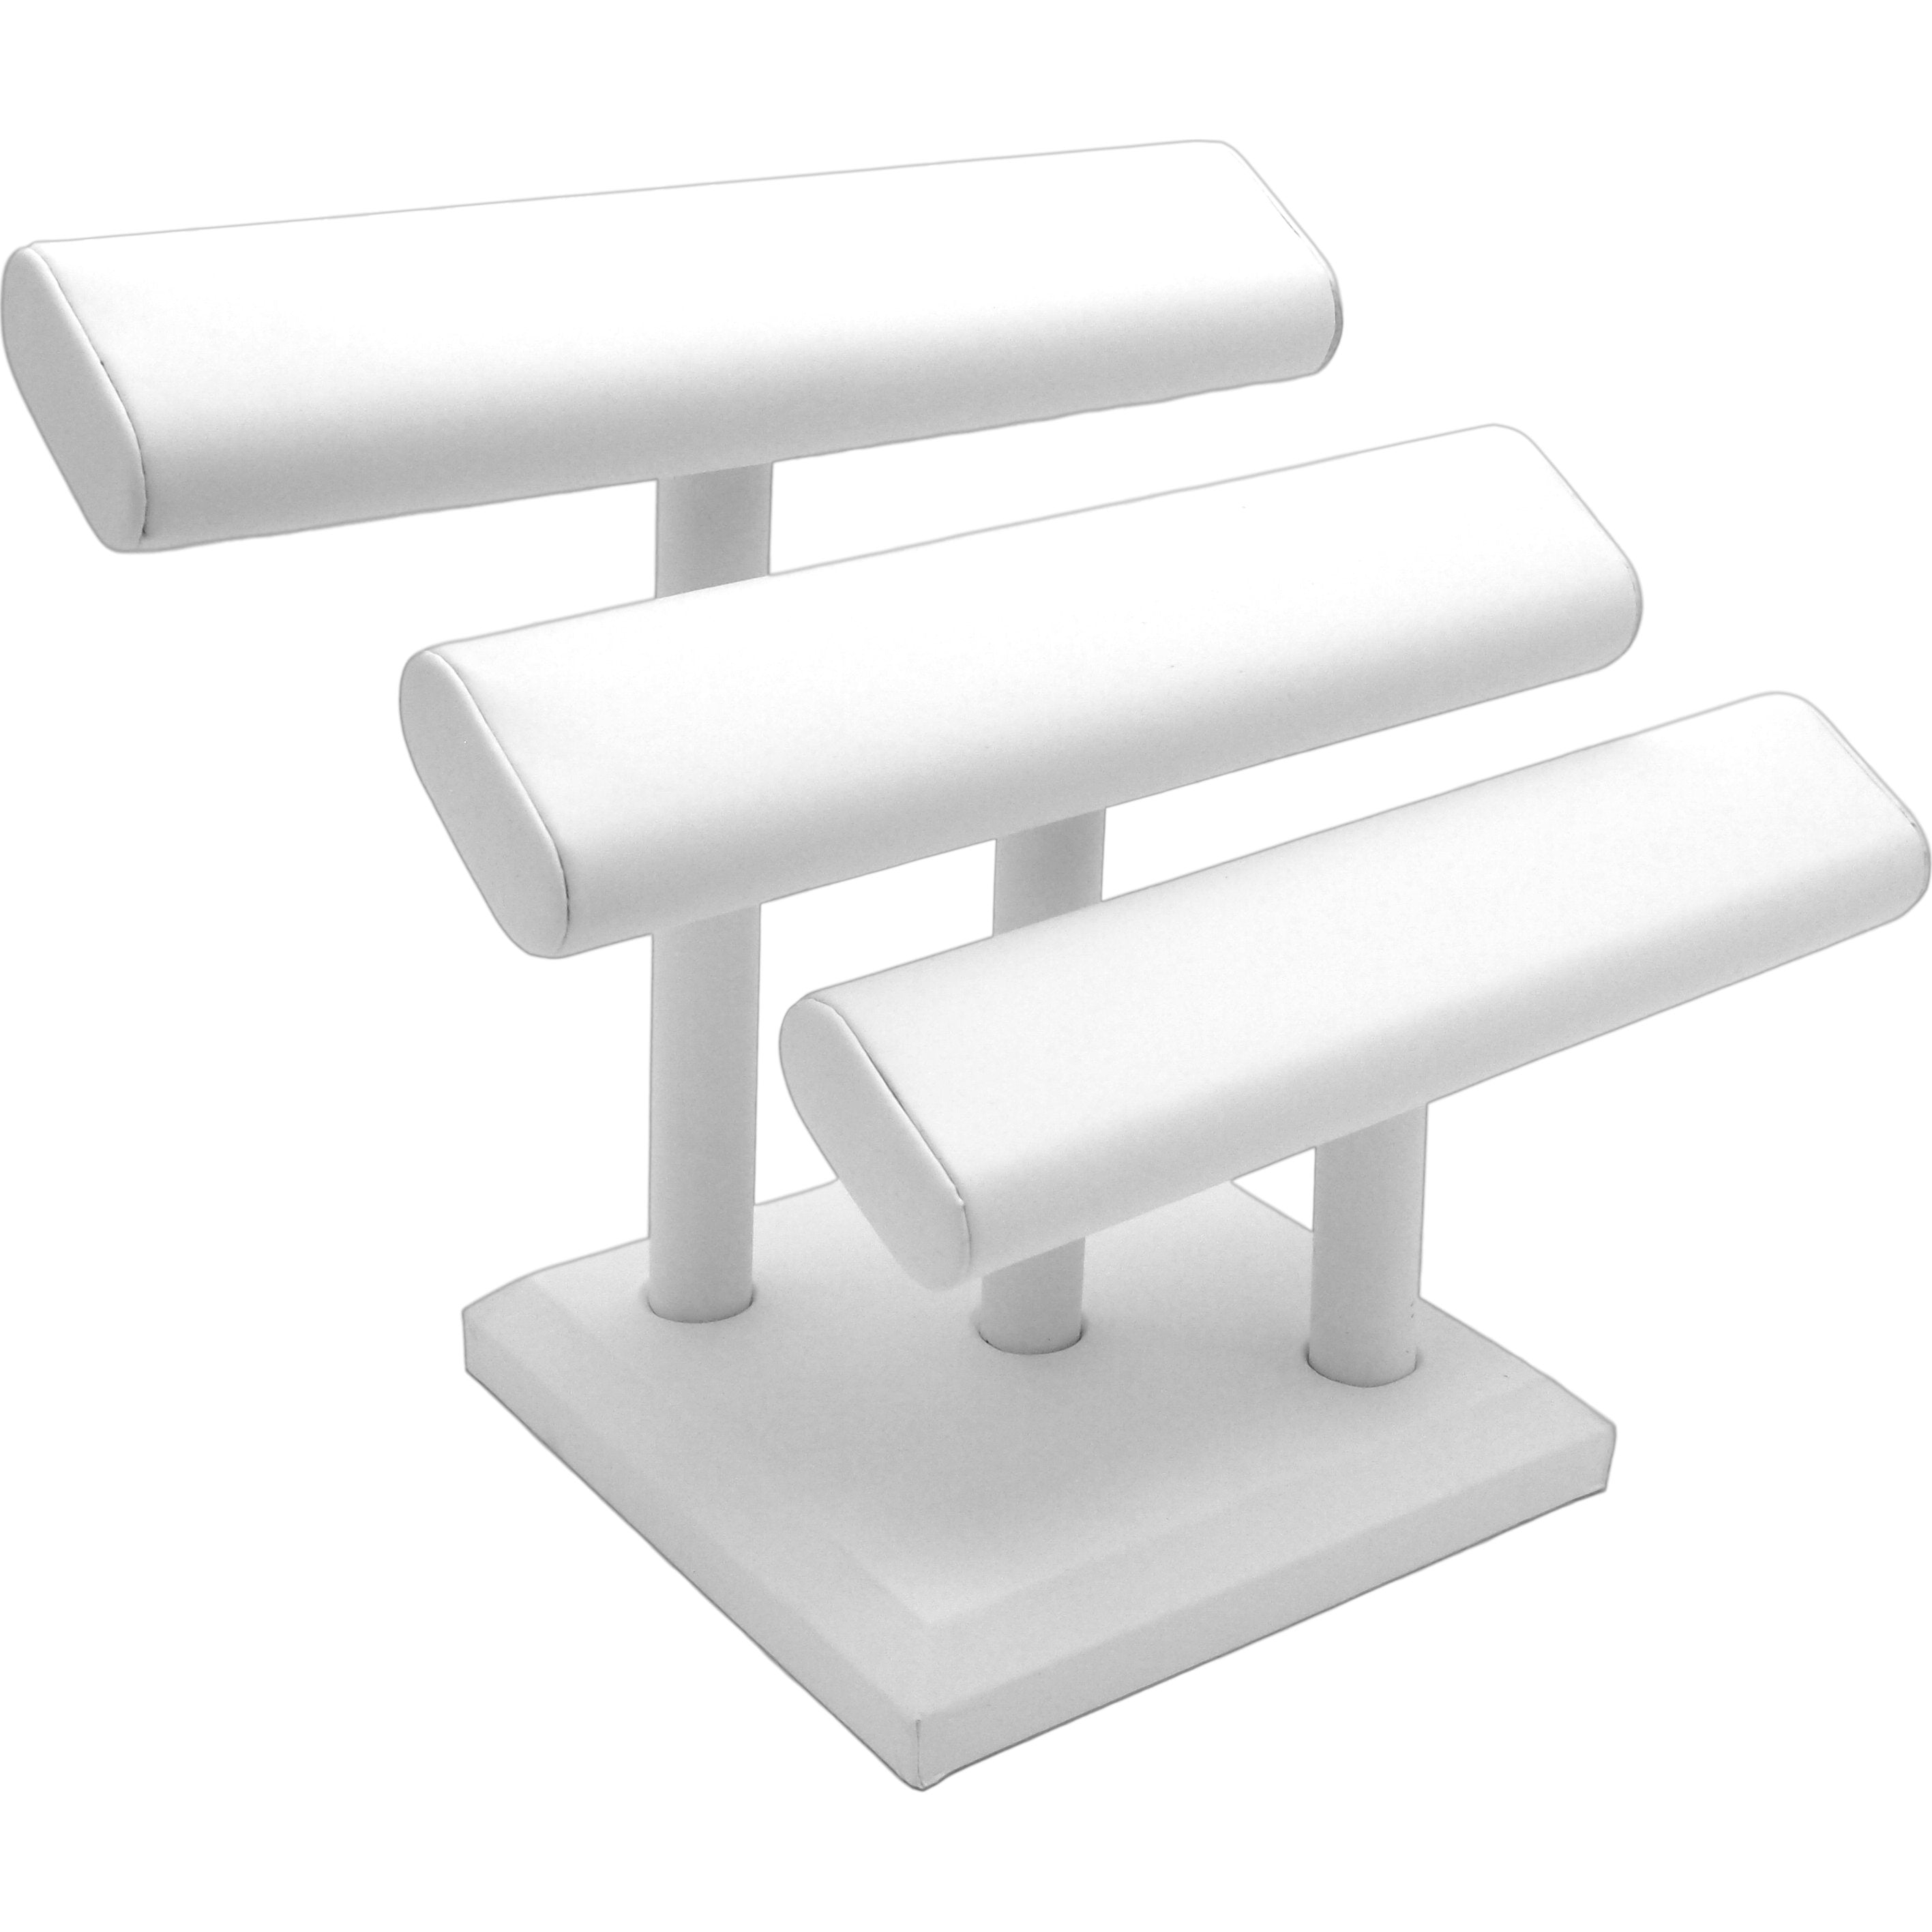 3 Tier White Leather T-Bar Bracelet & Necklace Jewelry Display Stands -  Walmart.com